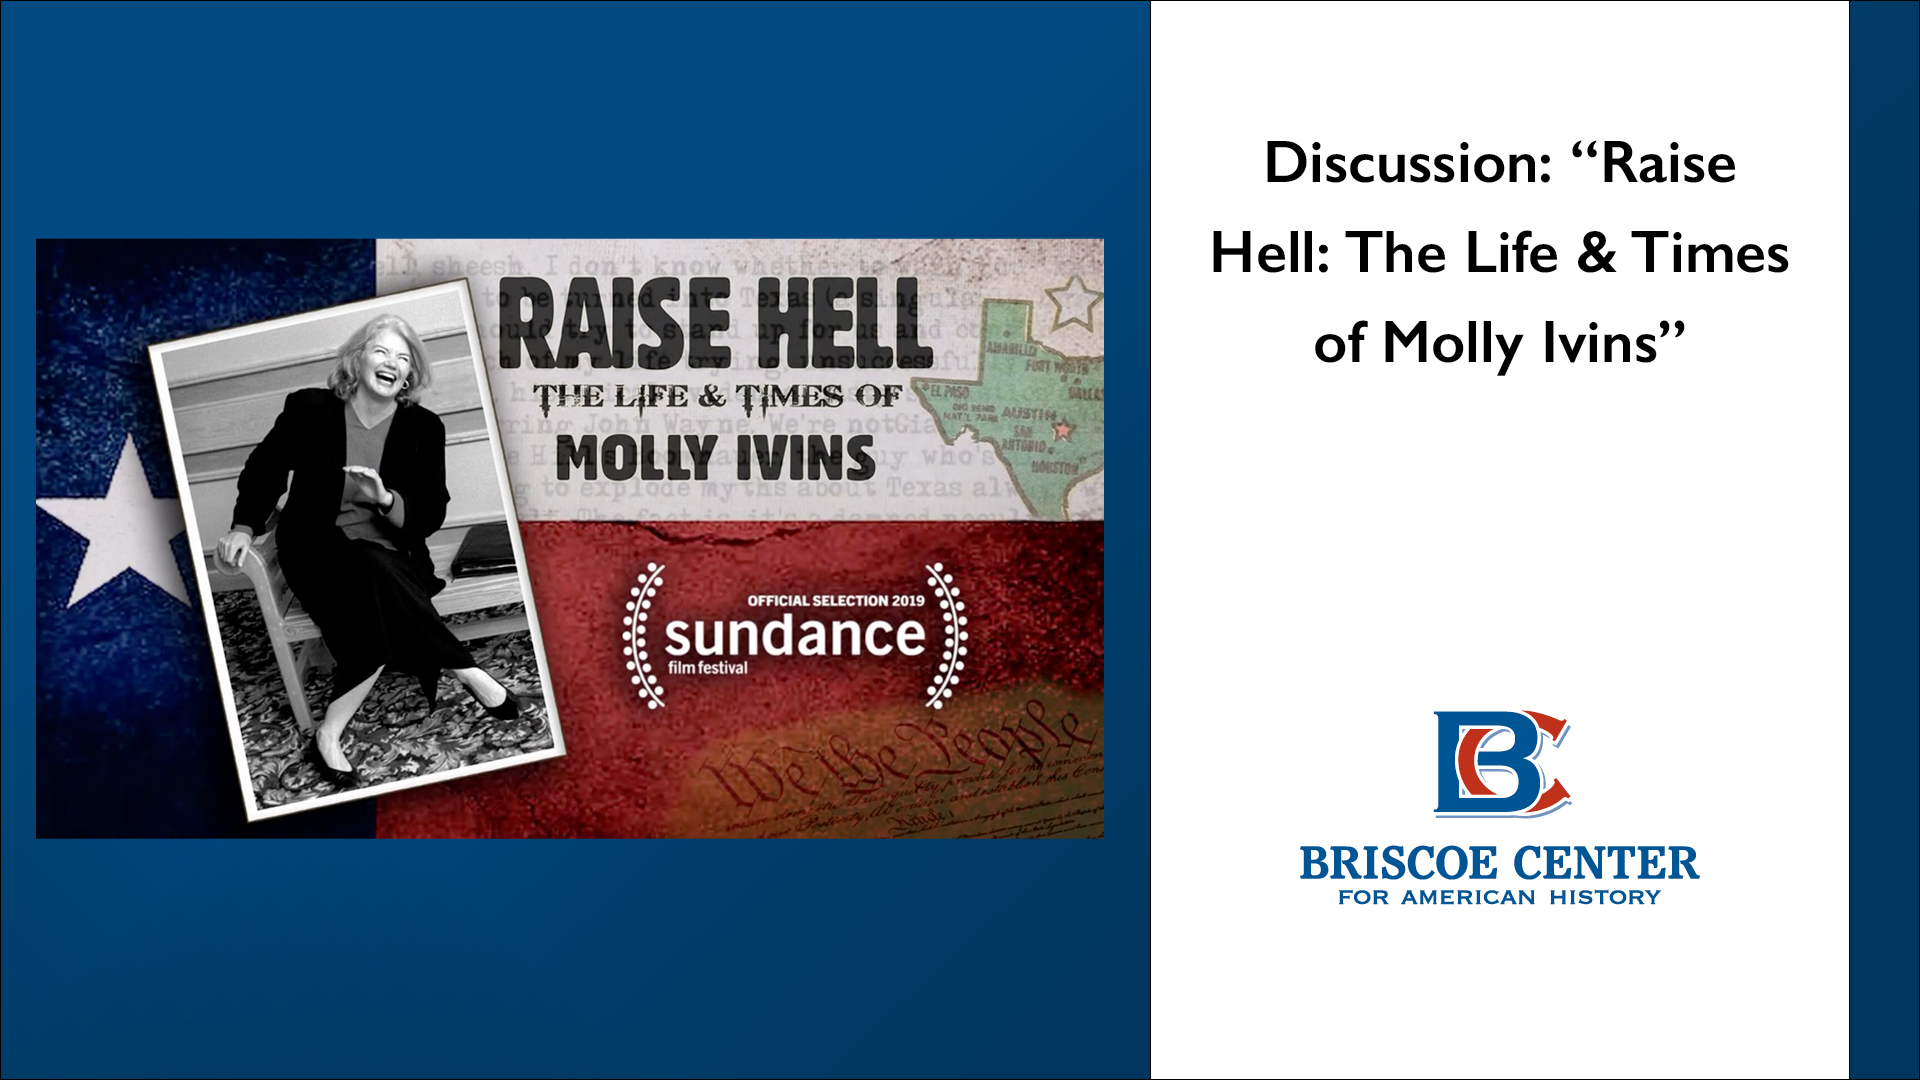 Discussion: "Raise Hell: The Life & Times of Molly Ivins"